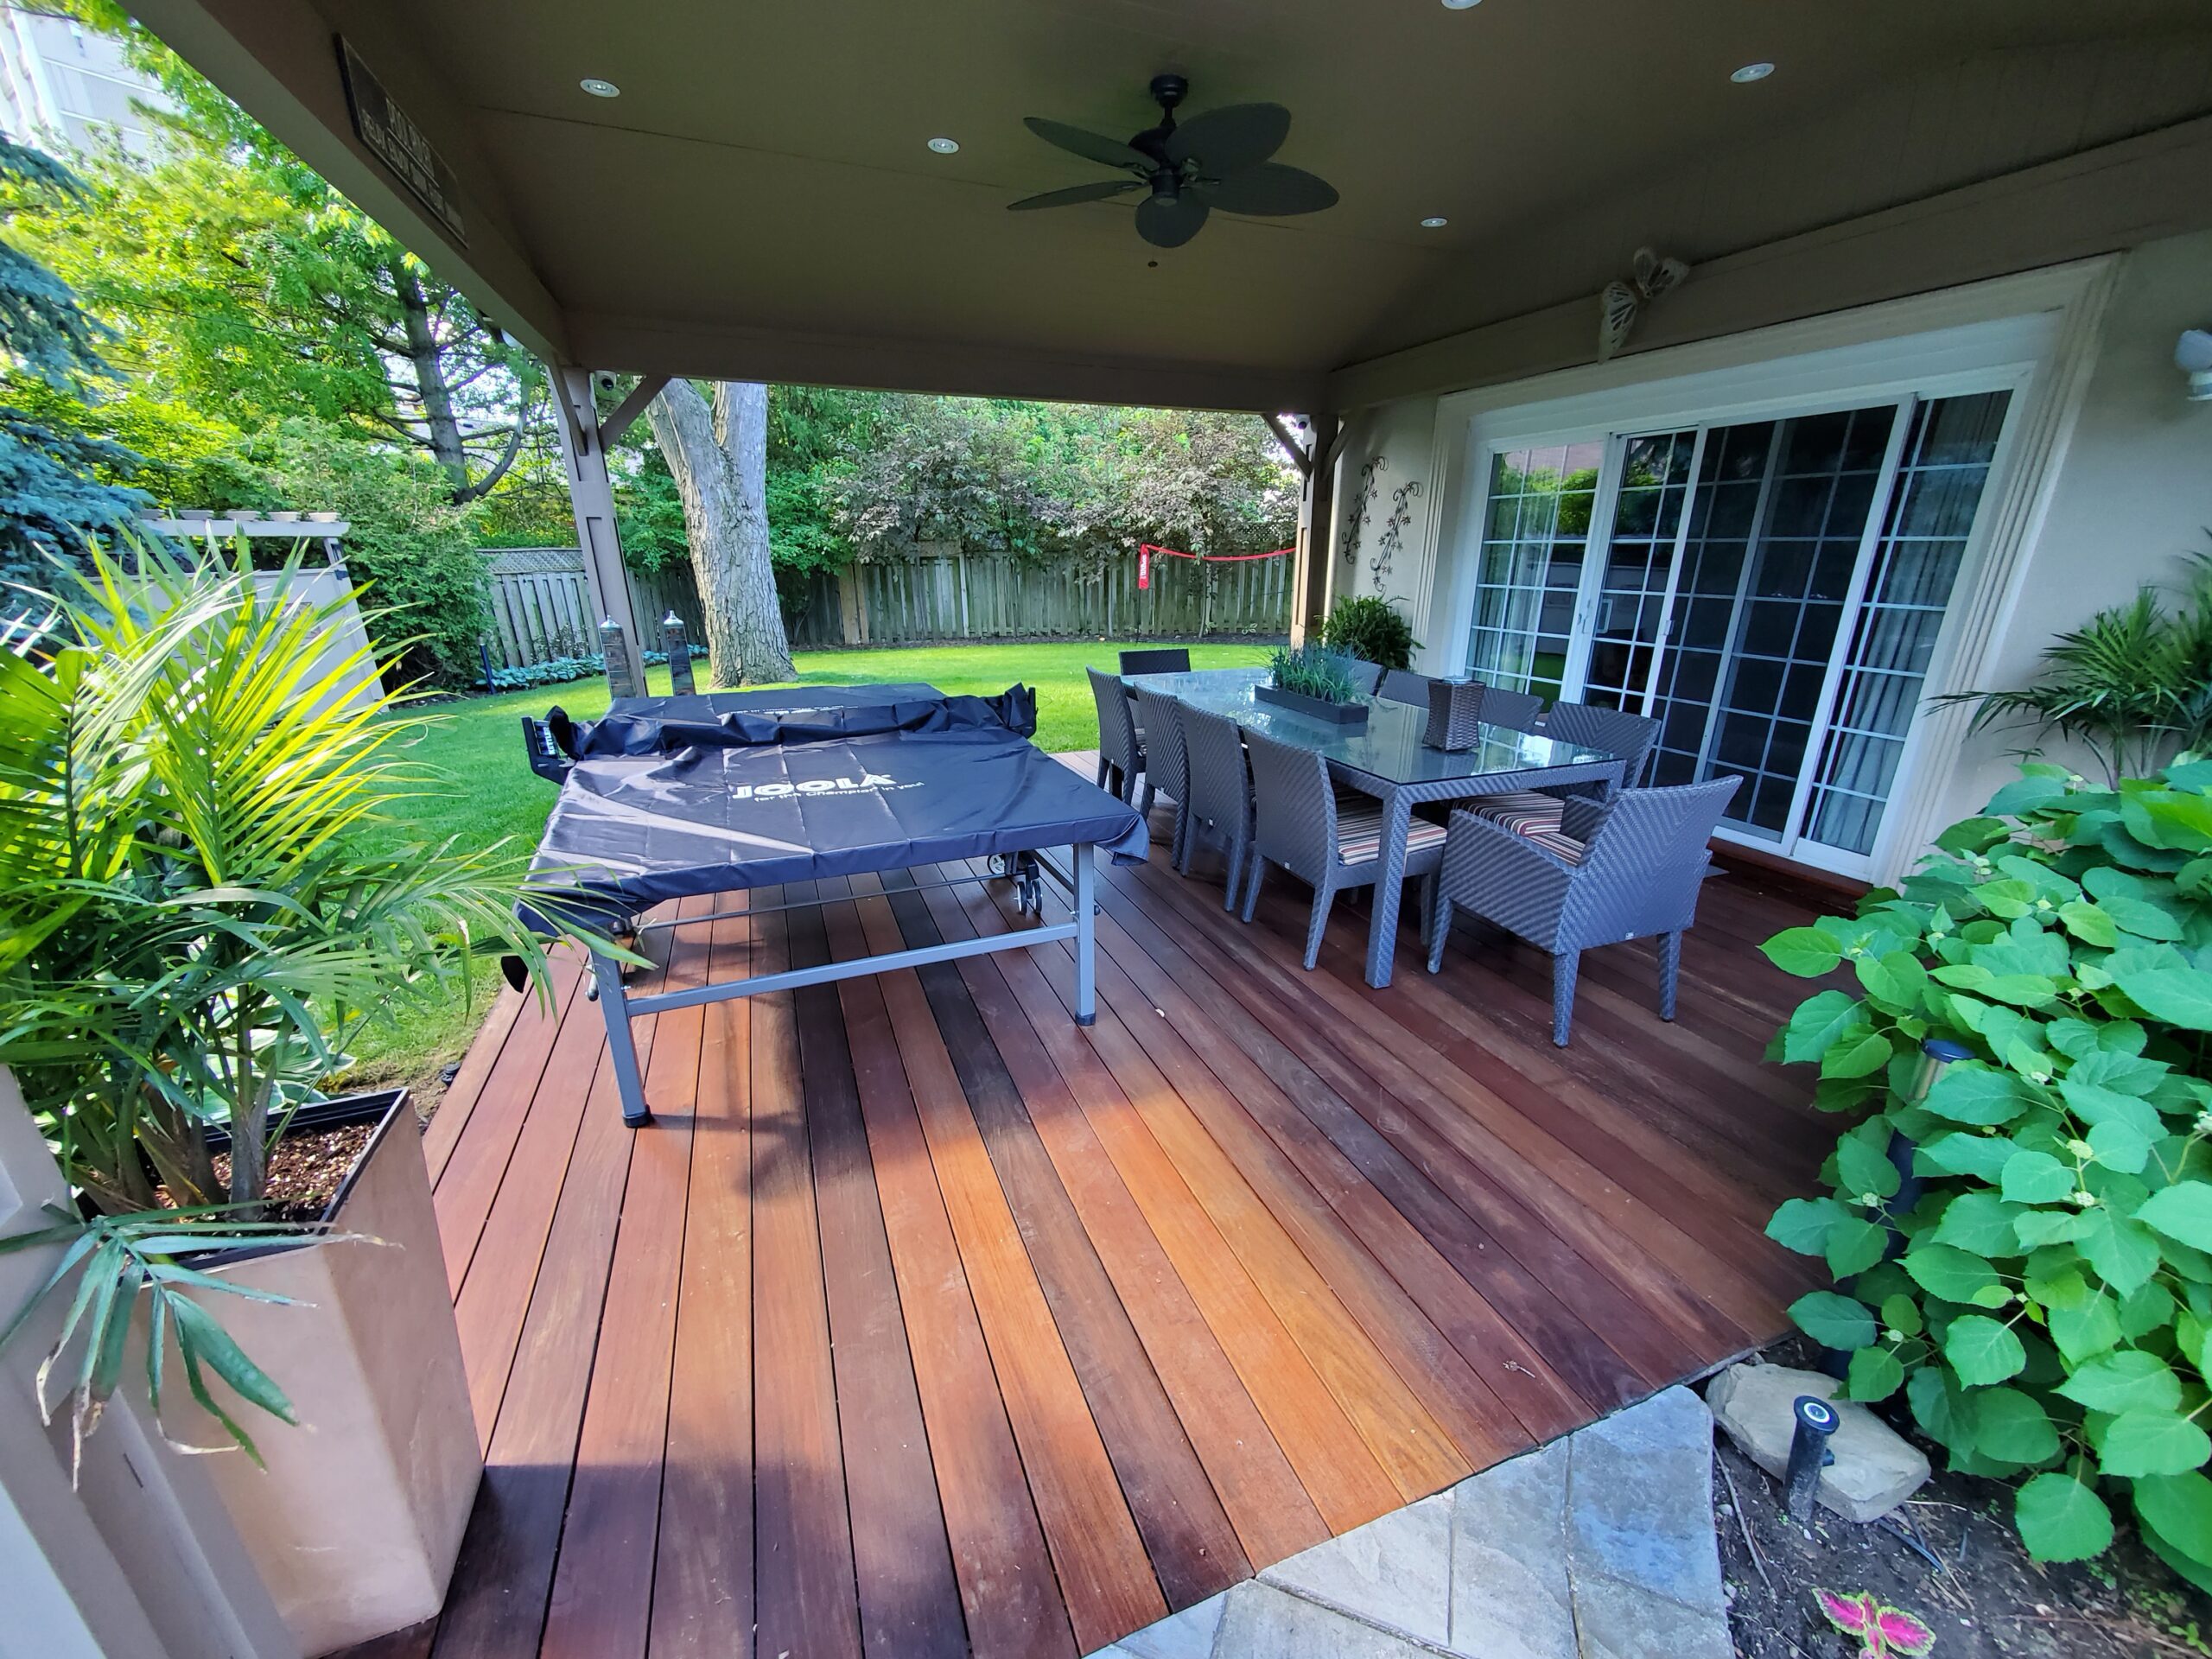 A wooden deck with a table and chairs.